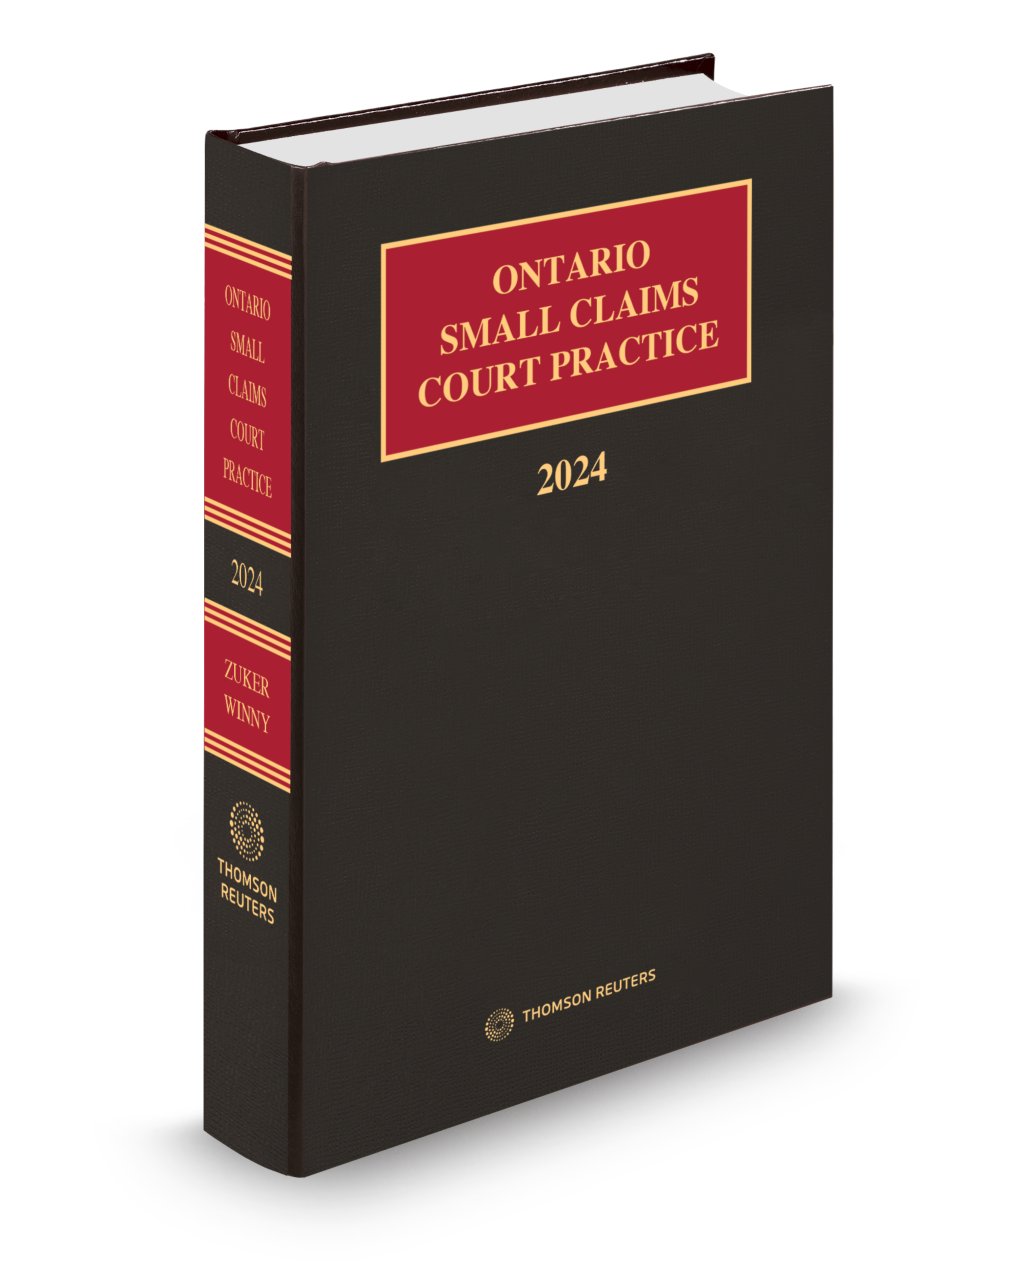 Ontario Small Claims Court Practice 2024 - New edition